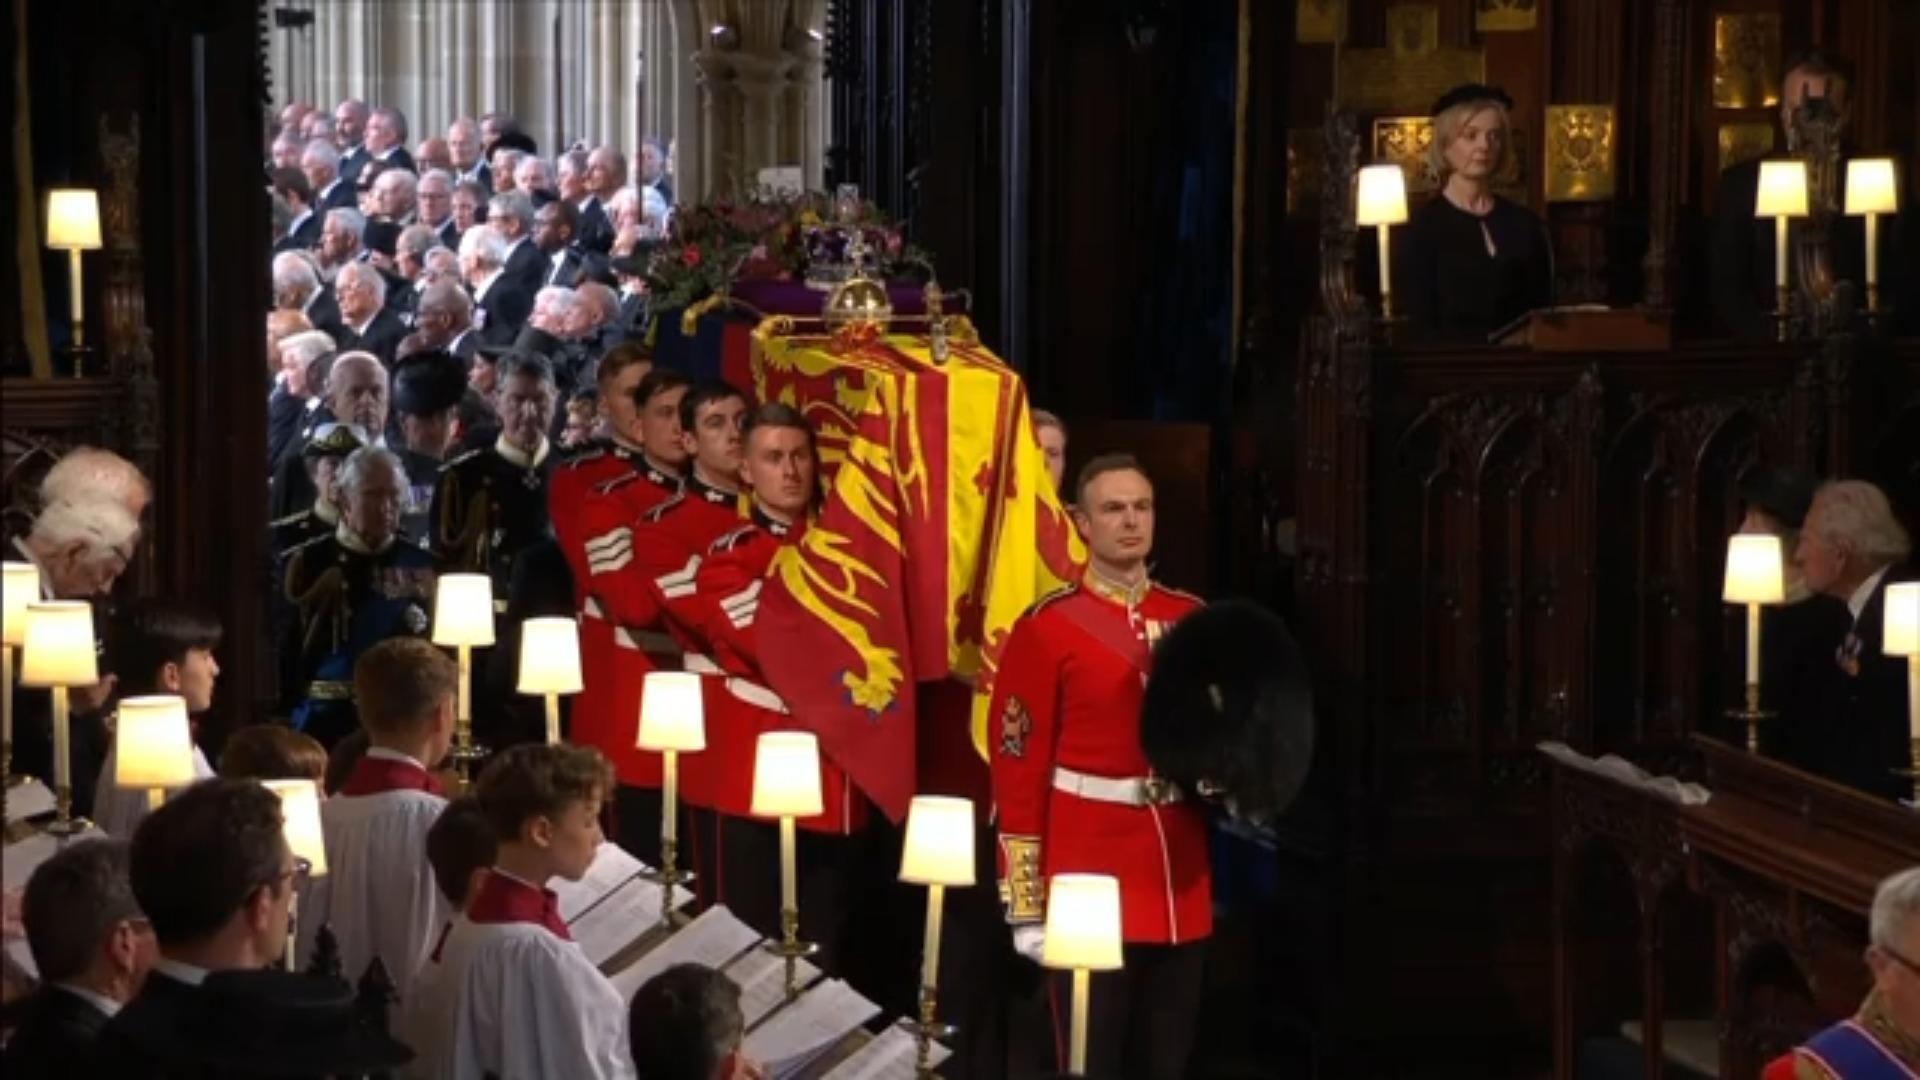 The Queen's coffin arrives at St George's Chapel